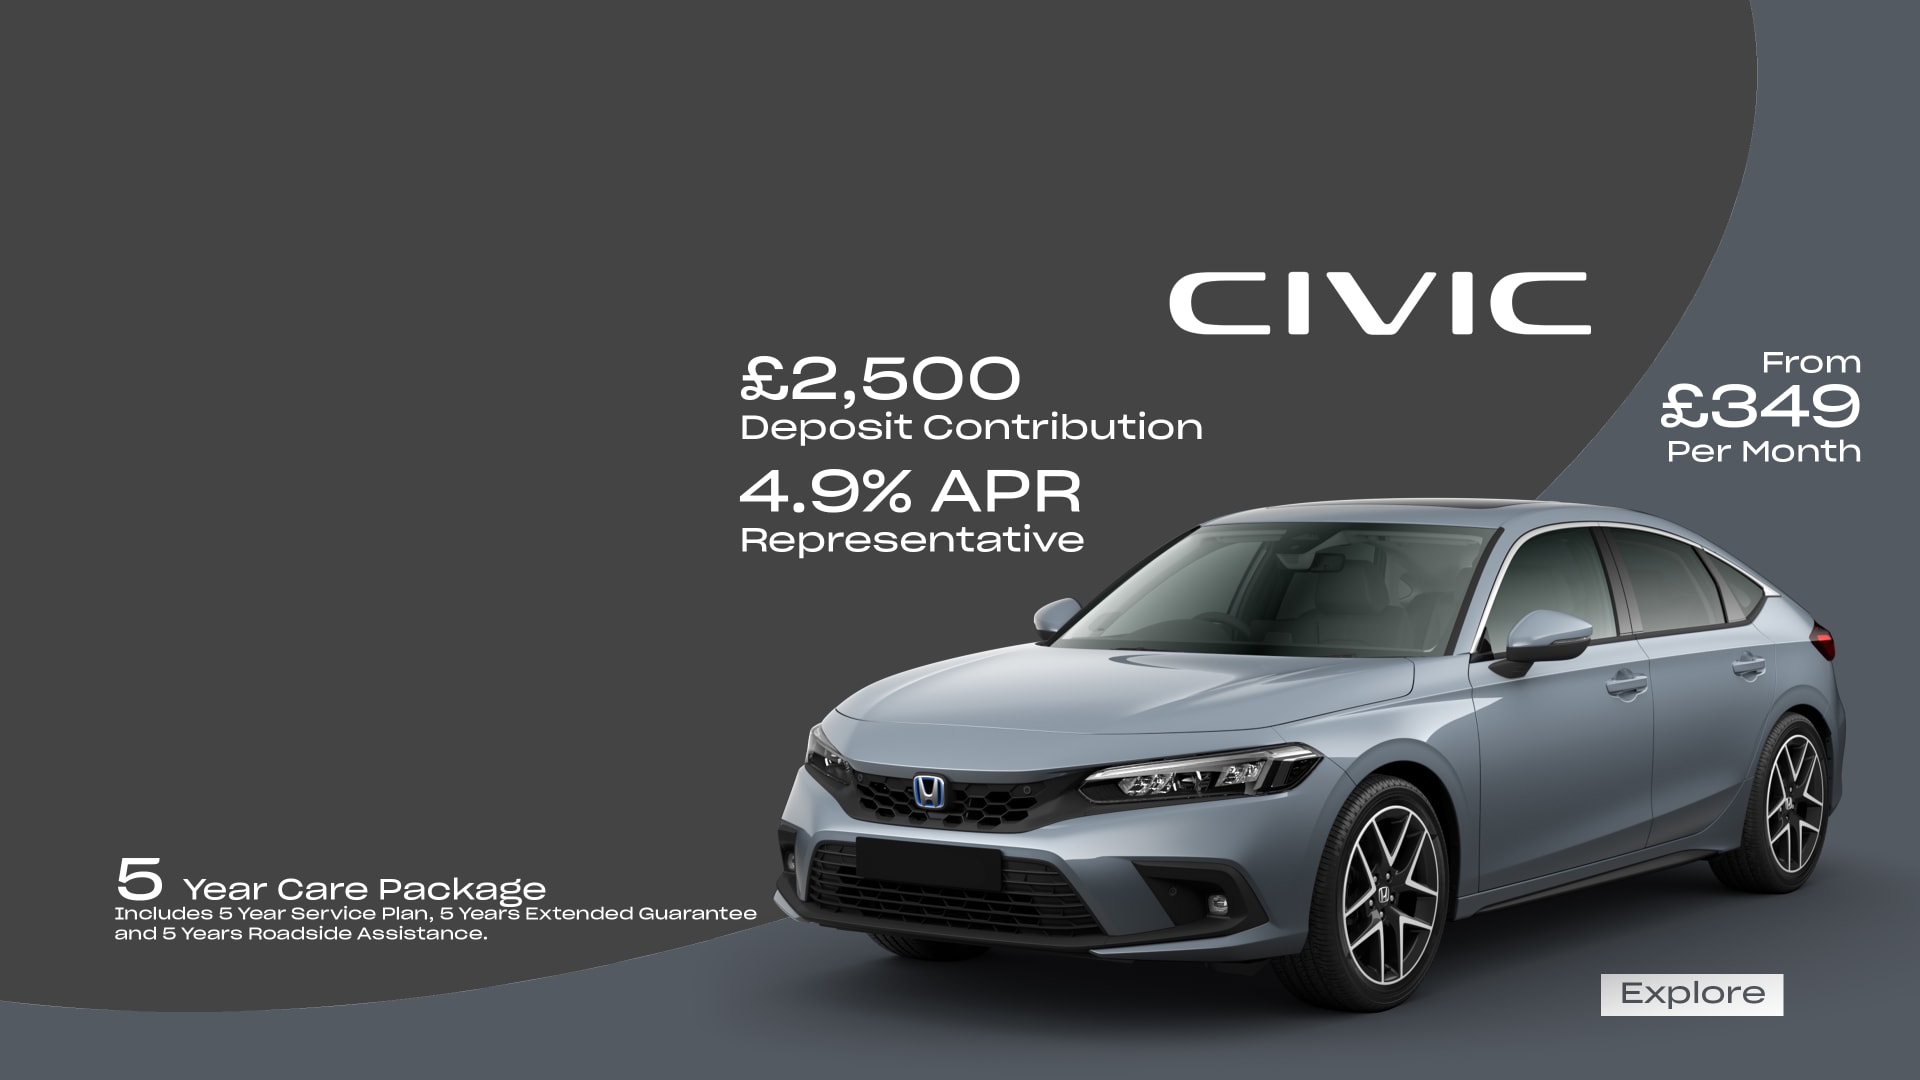 Civic from £349 per month